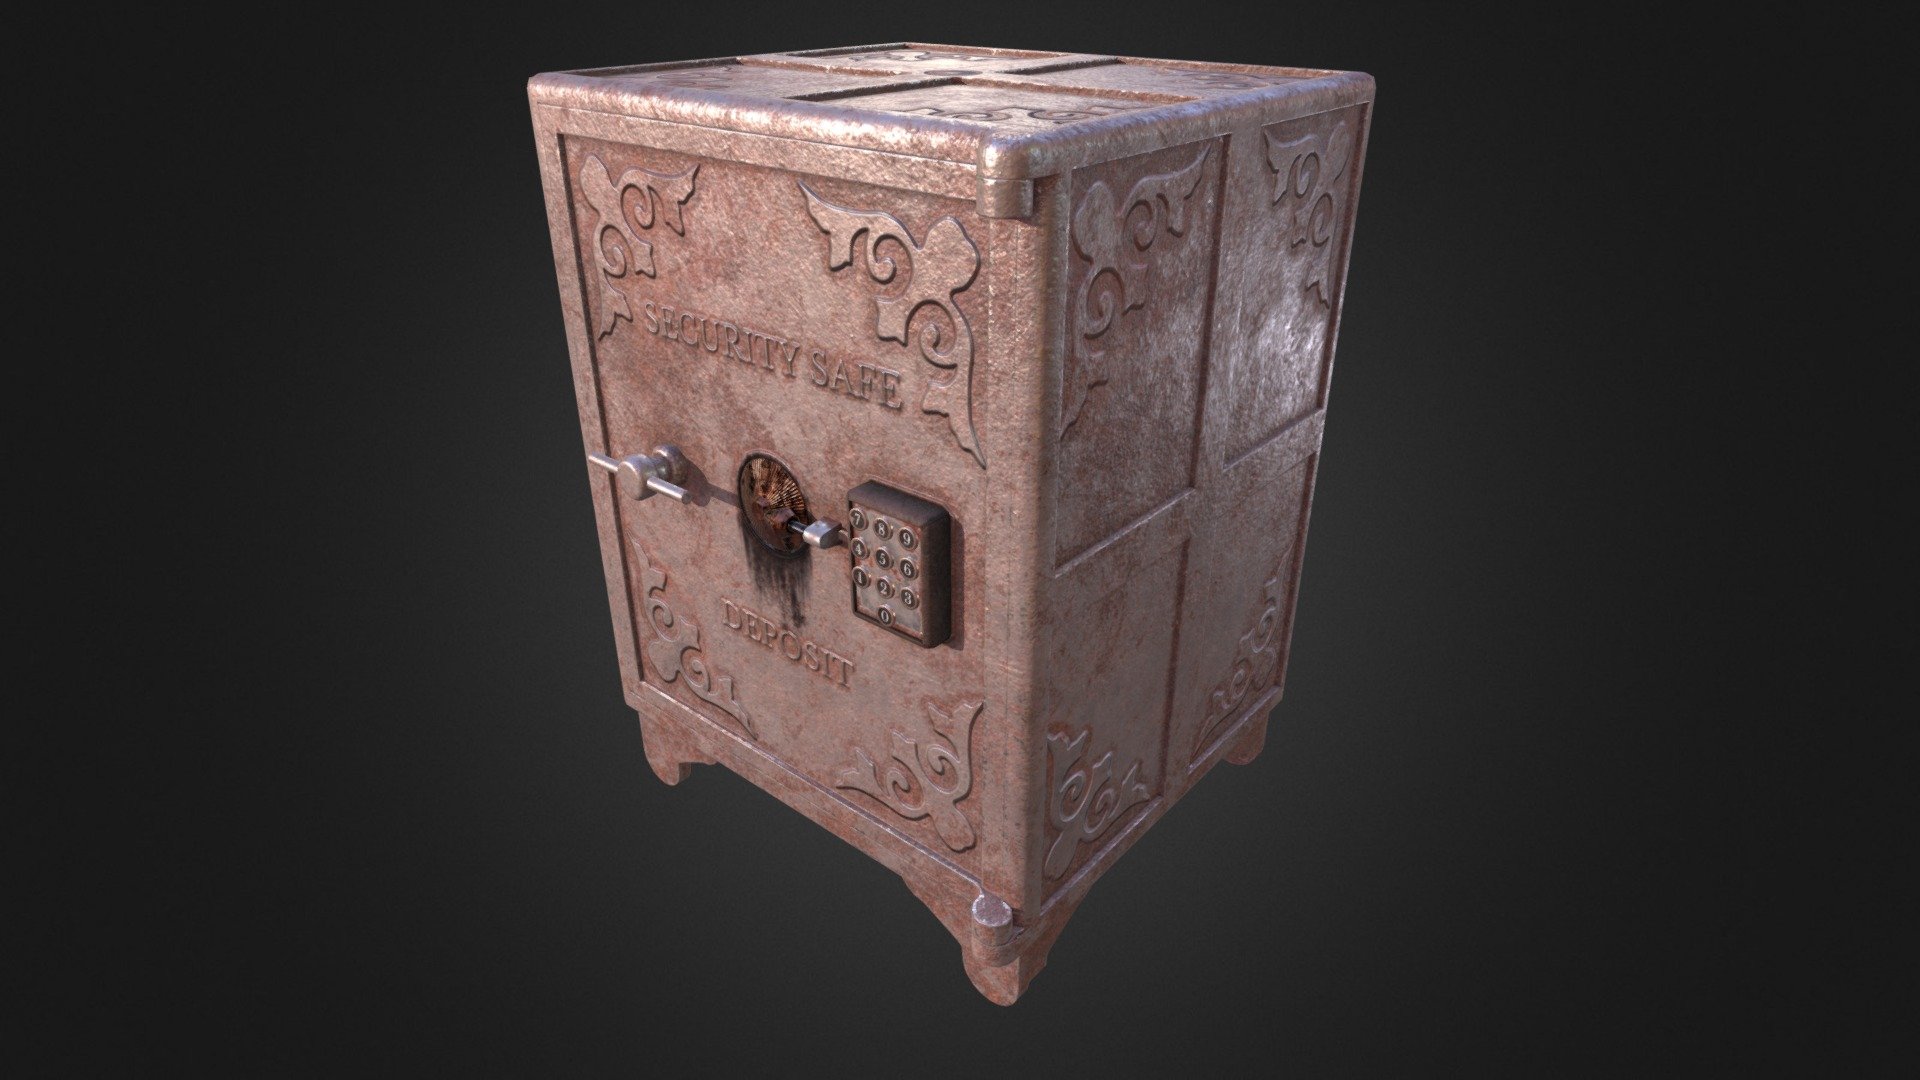 Antique Security Safe with Steampunk mechanism is a 3d model that mix rudimentary wheel system with numeric security panel connected to gears engine. Has beed modeled in Blender and textured with Substance Painter/GIMP. 2096 tris 3d model